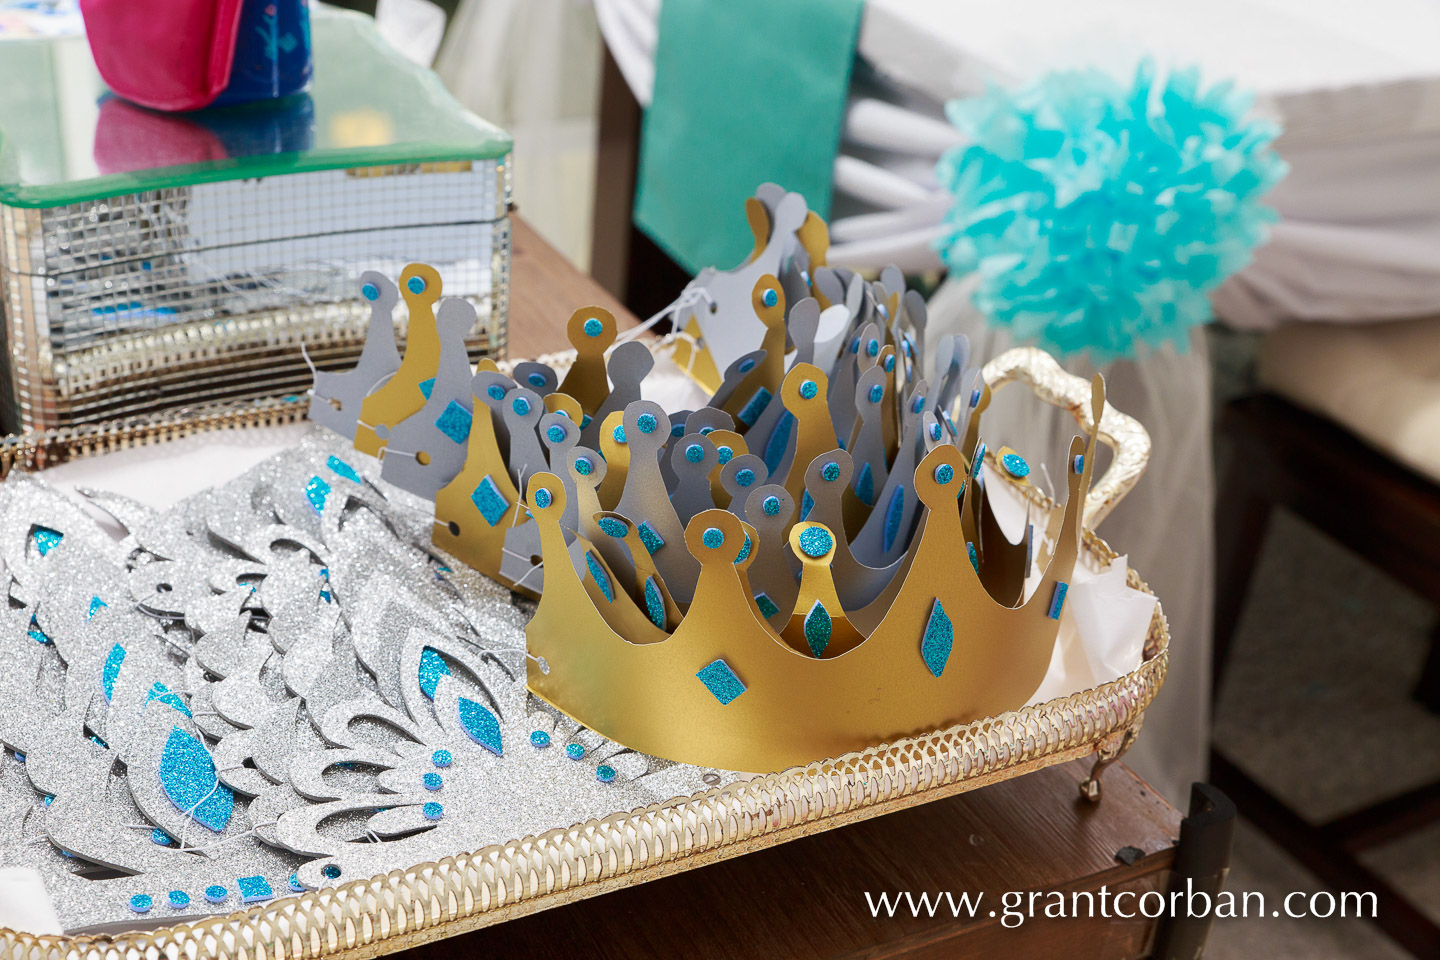 details of Frozen themed childrens birthday party